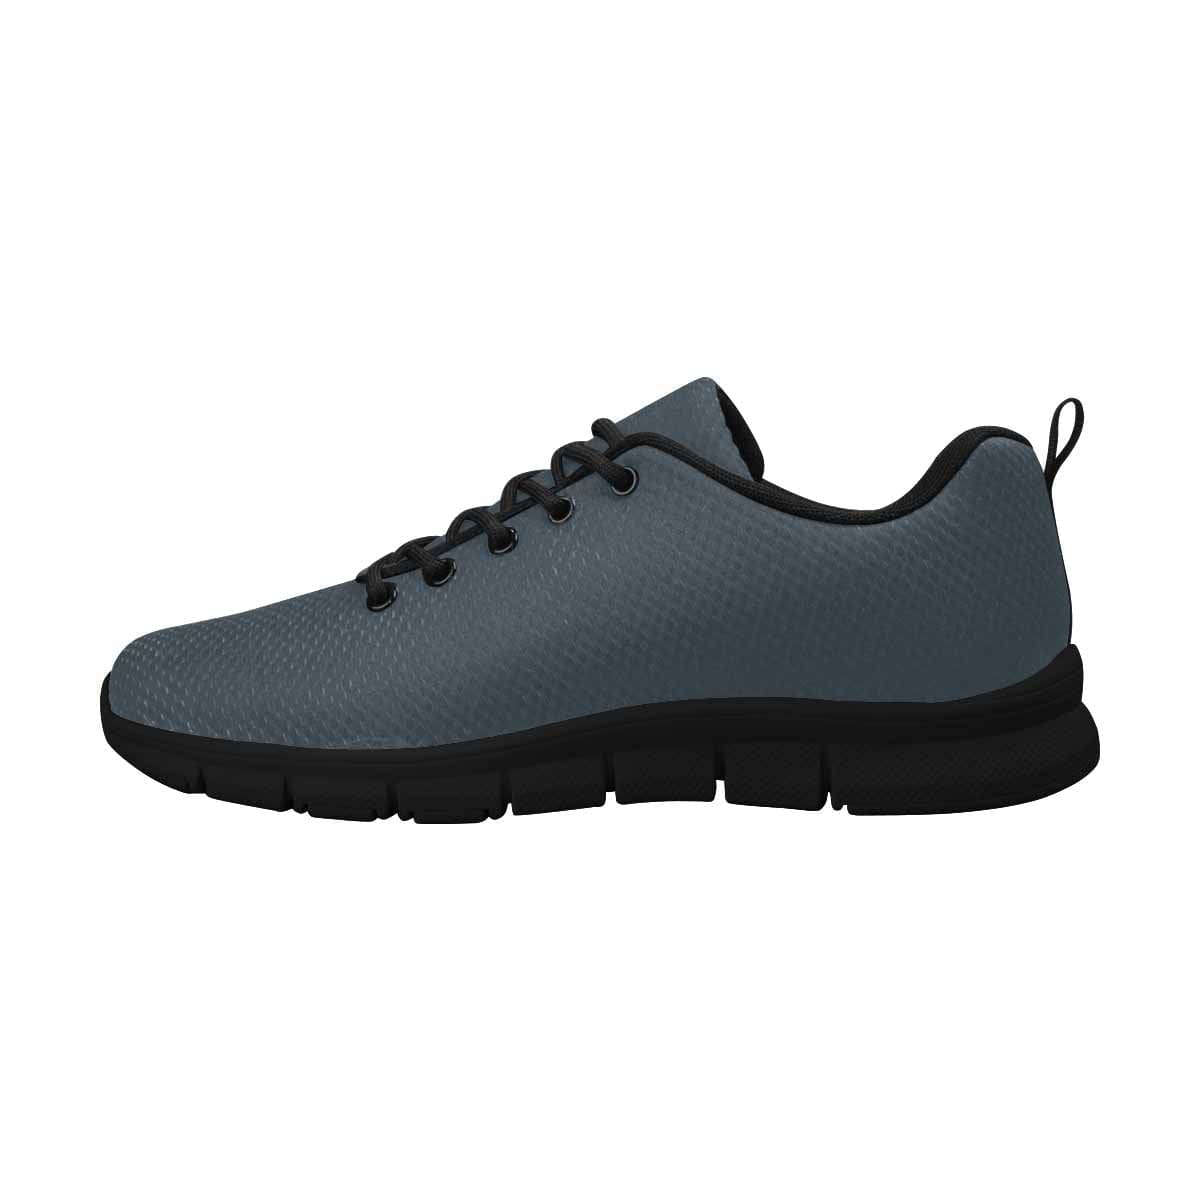 Sneakers For Men Charcoal Black Running Shoes - Mens | Sneakers | Running